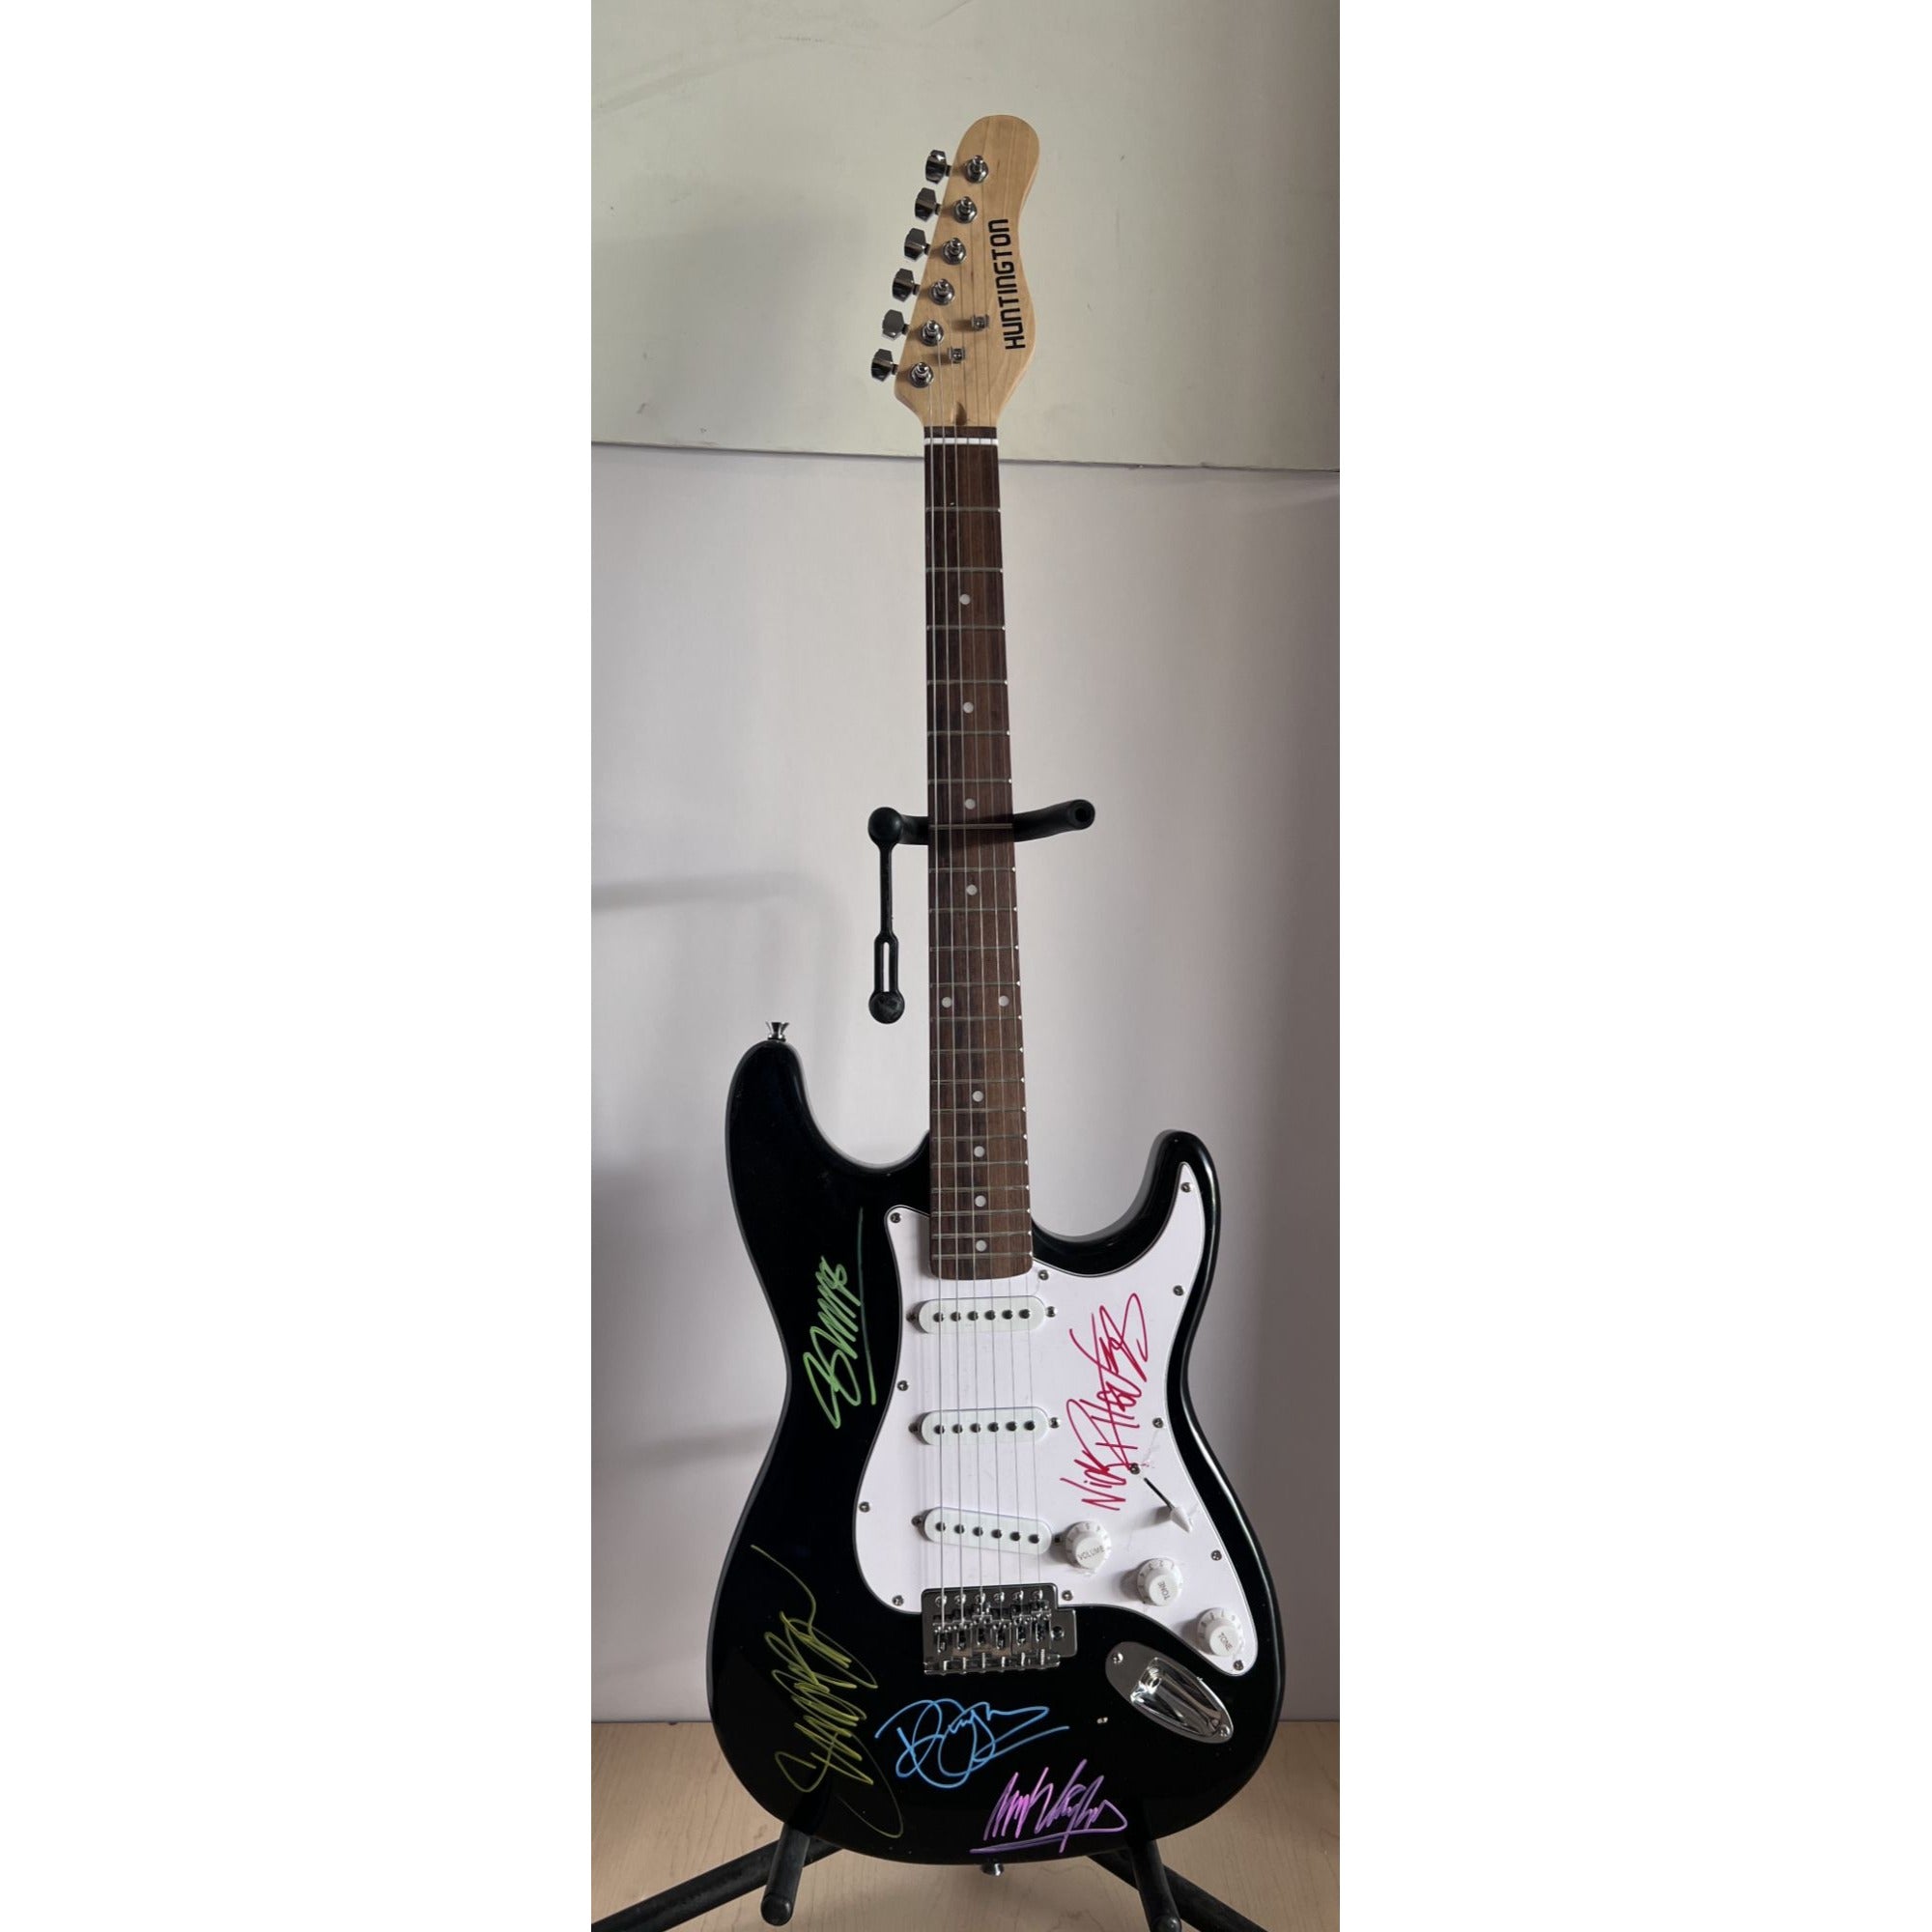 Simon Lebon Nick Rhodes John Taylor Andy Taylor Stratocaster full size electric guitar signed with proof